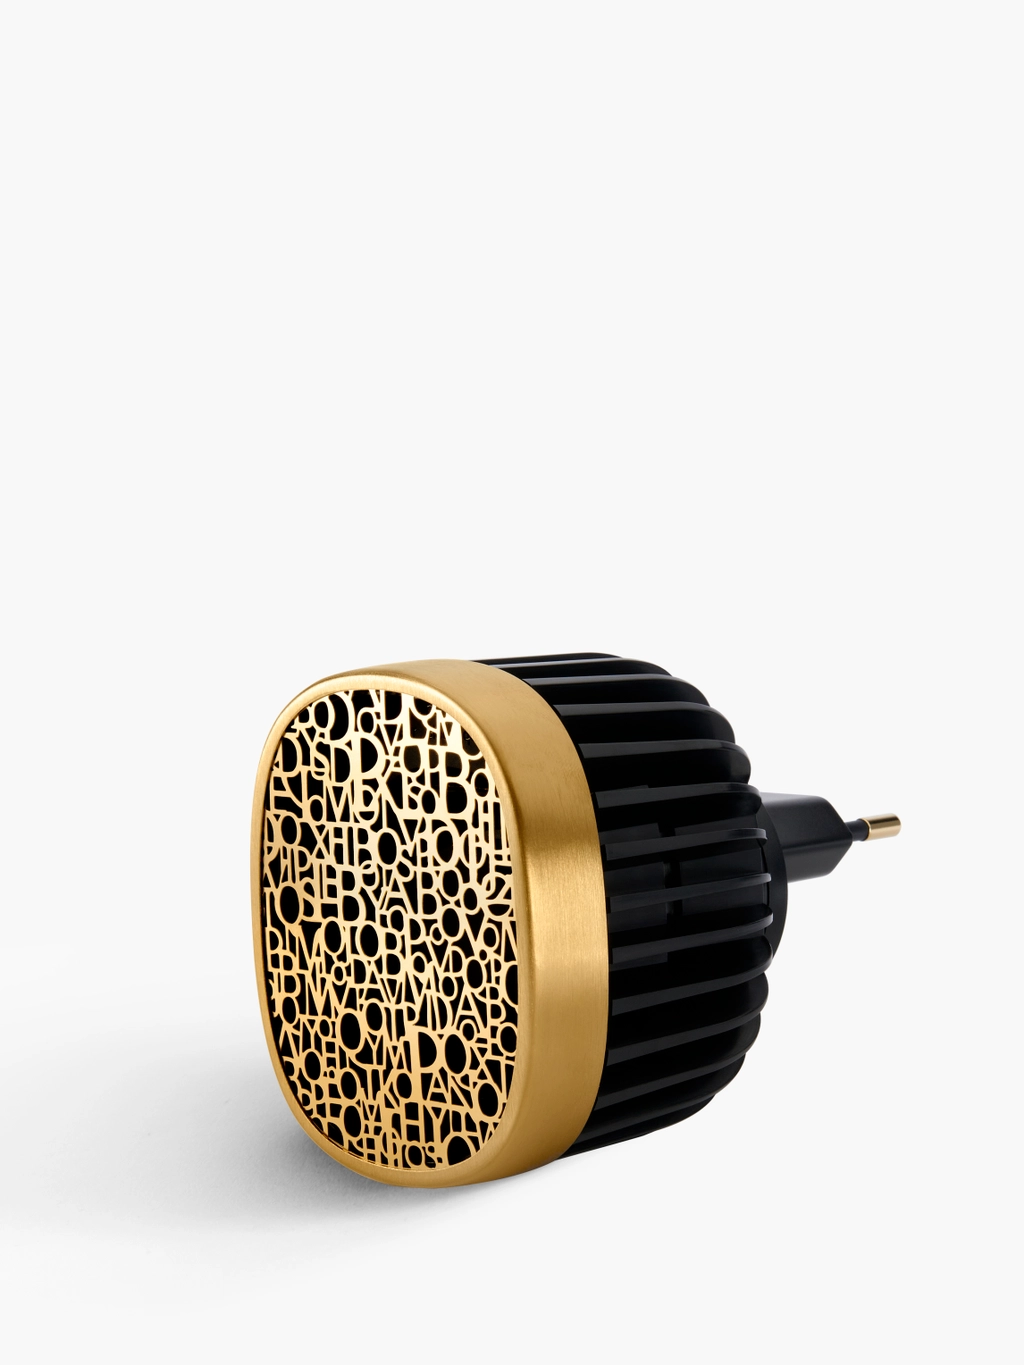 https://www.diptyqueparis.com/media/catalog/product/d/i/diptyque-electric-wall-diffuser-elecplug-1.jpg?quality=100&bg-color=255,255,255&fit=bounds&height=&width=&format=webp&width=1024&quality=90